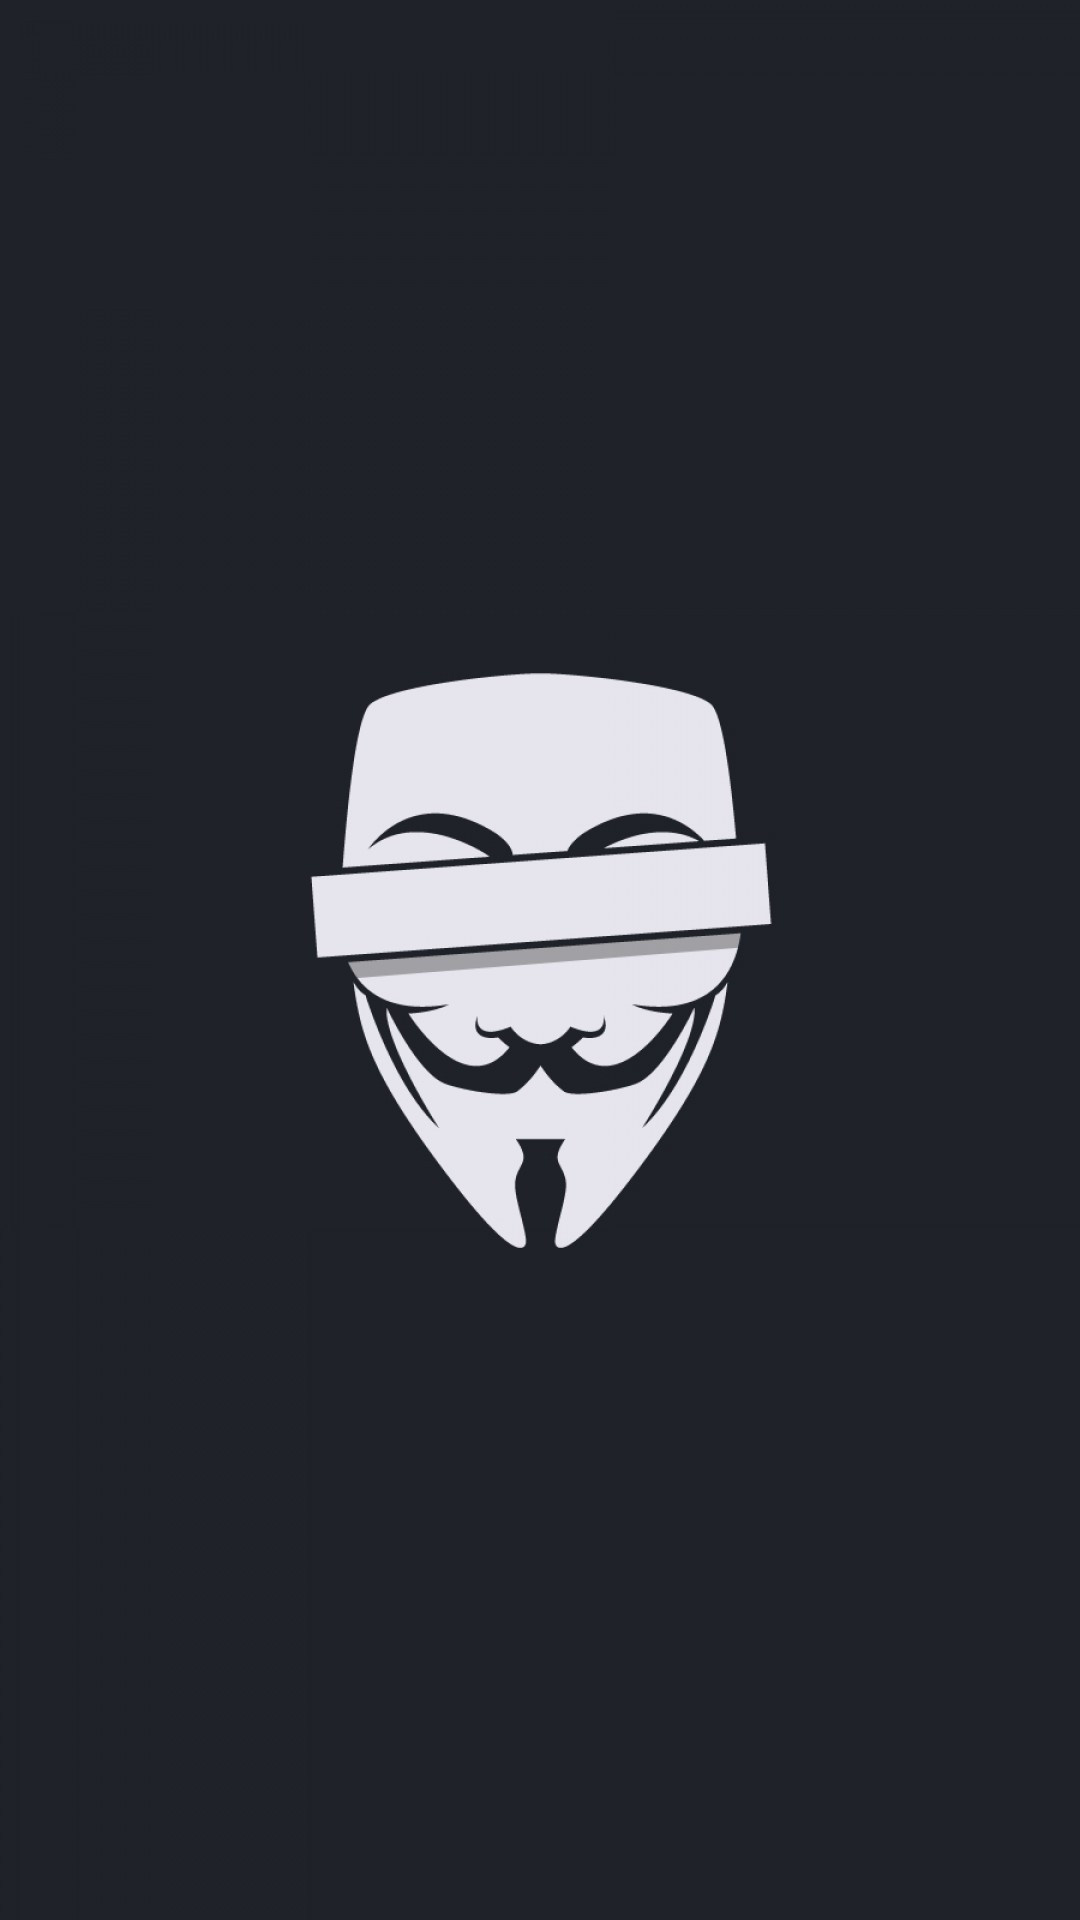 Guy Fawkes Mask: Was adapted for use in protests by the hacktivist group Anonymous. 1080x1920 Full HD Background.